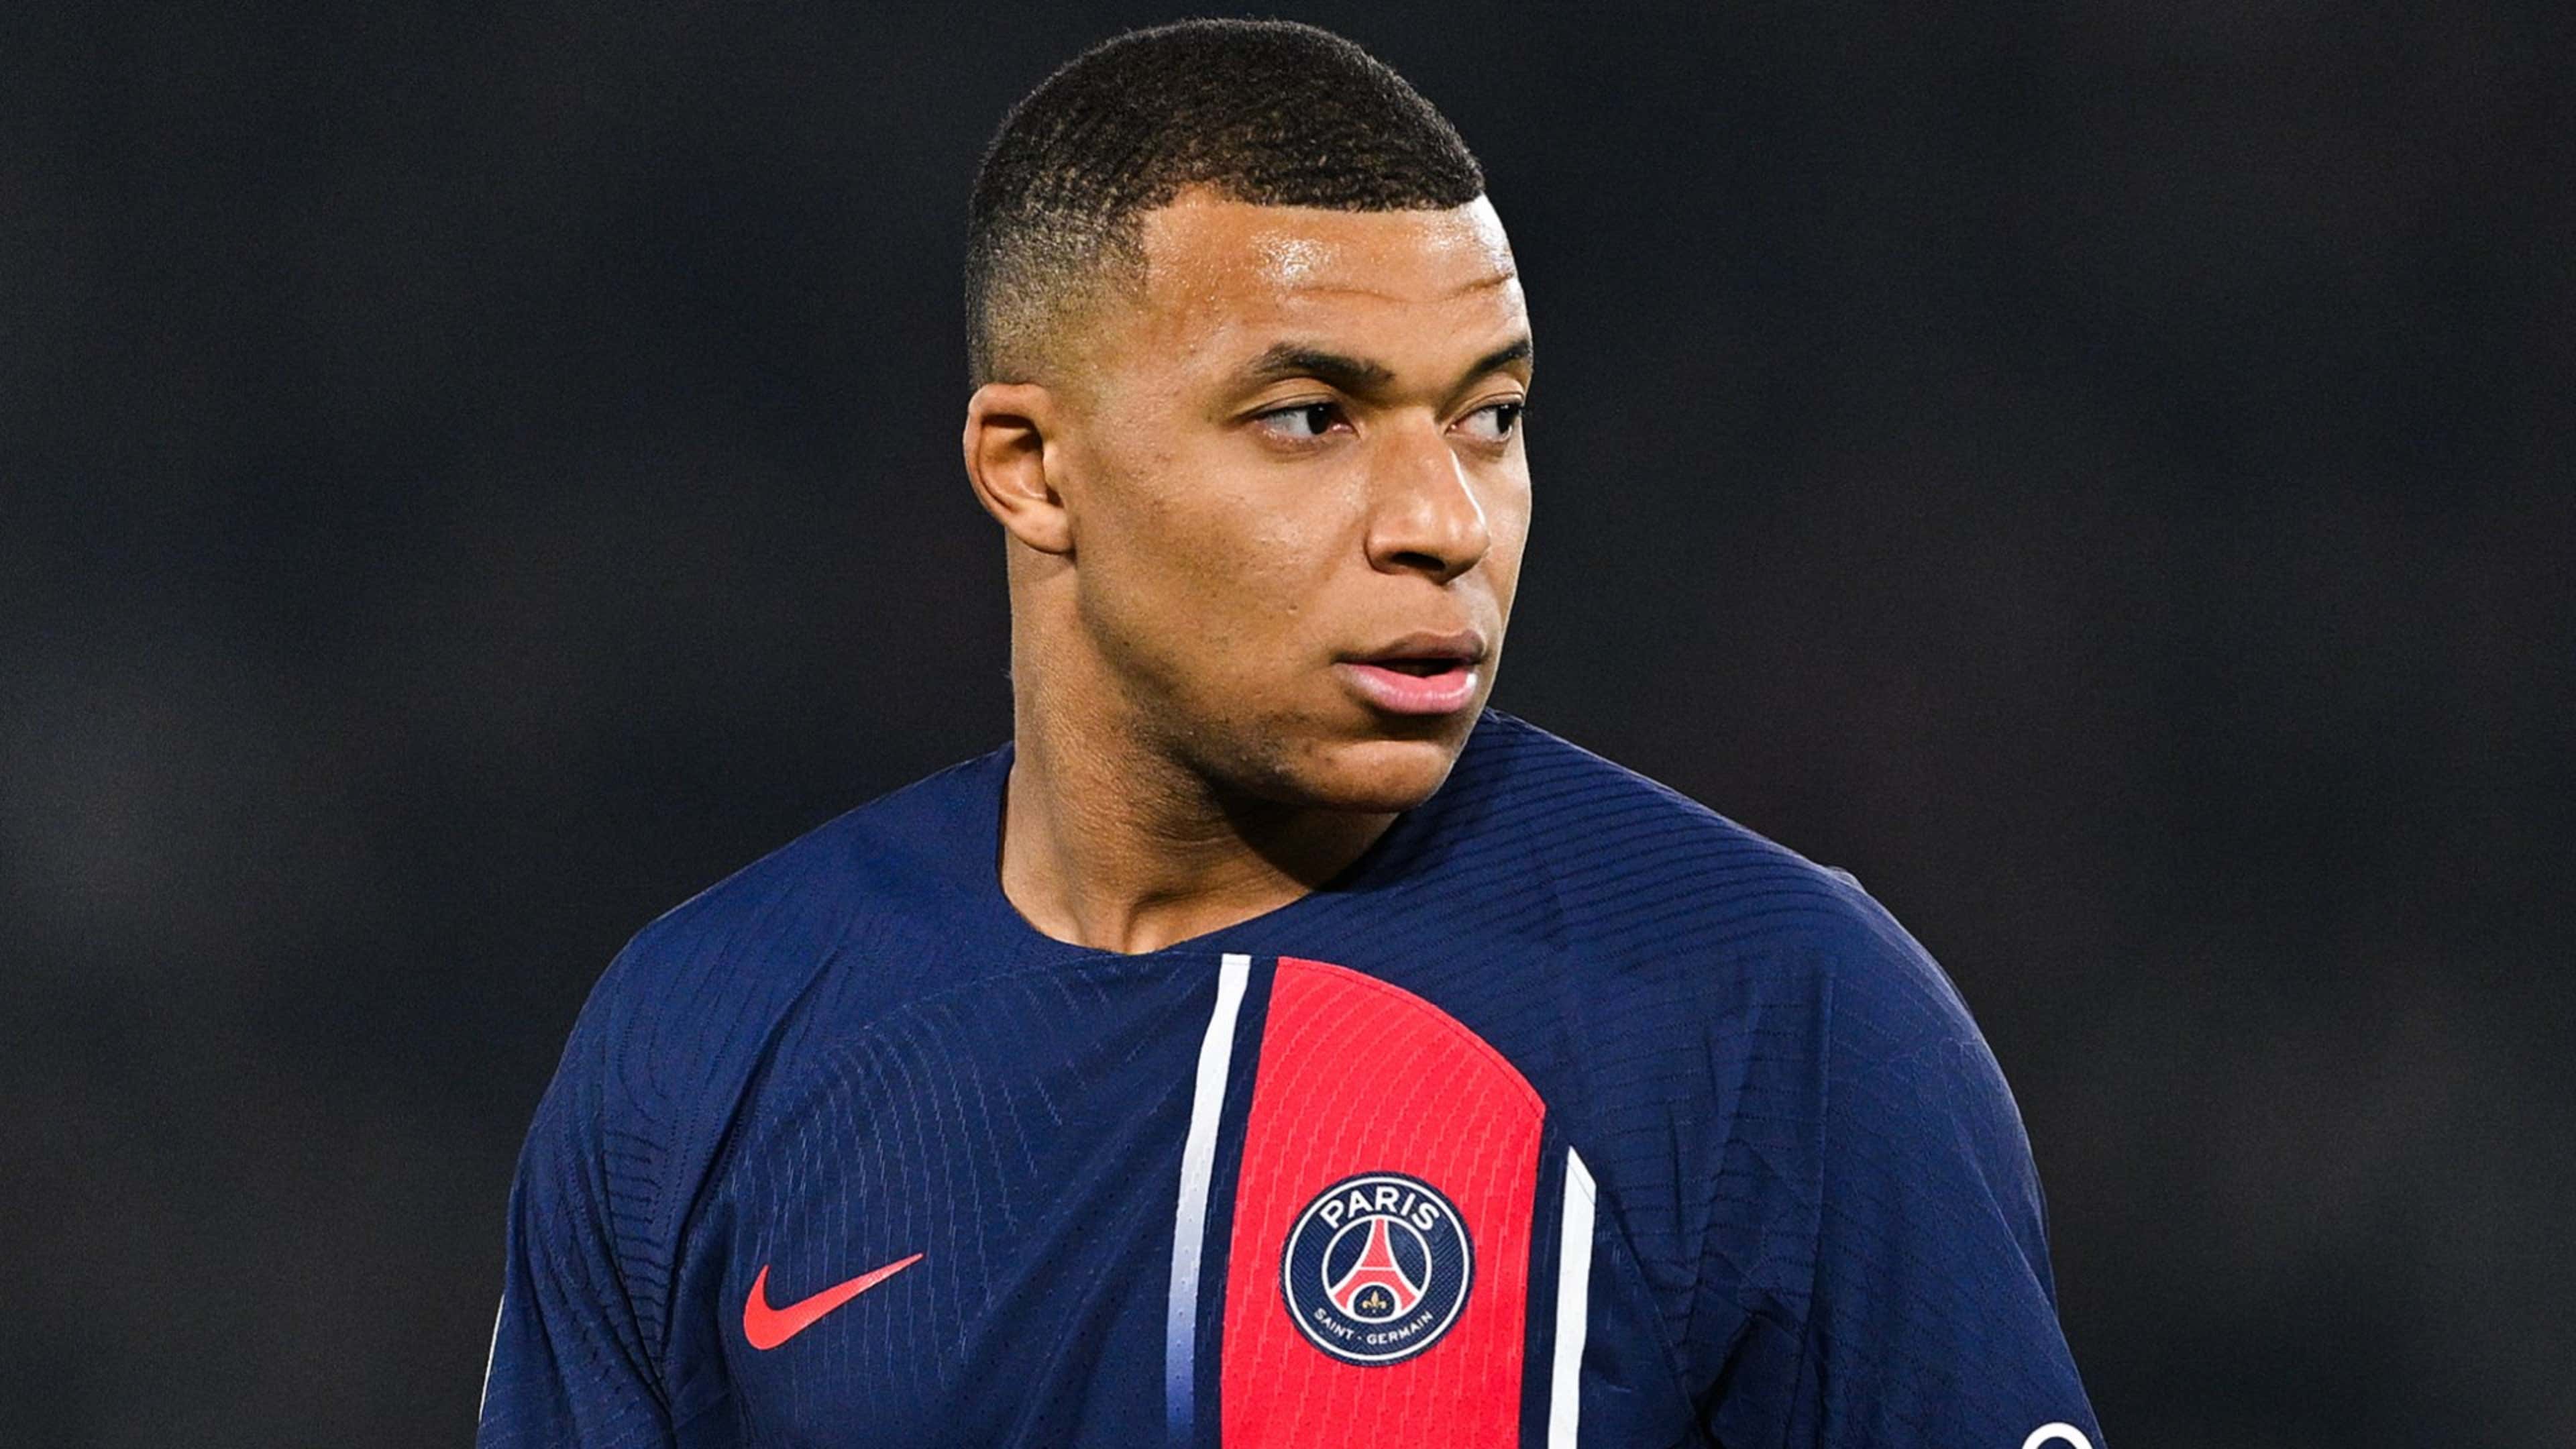 Completely false' - Real Madrid issue statement on Kylian Mbappe